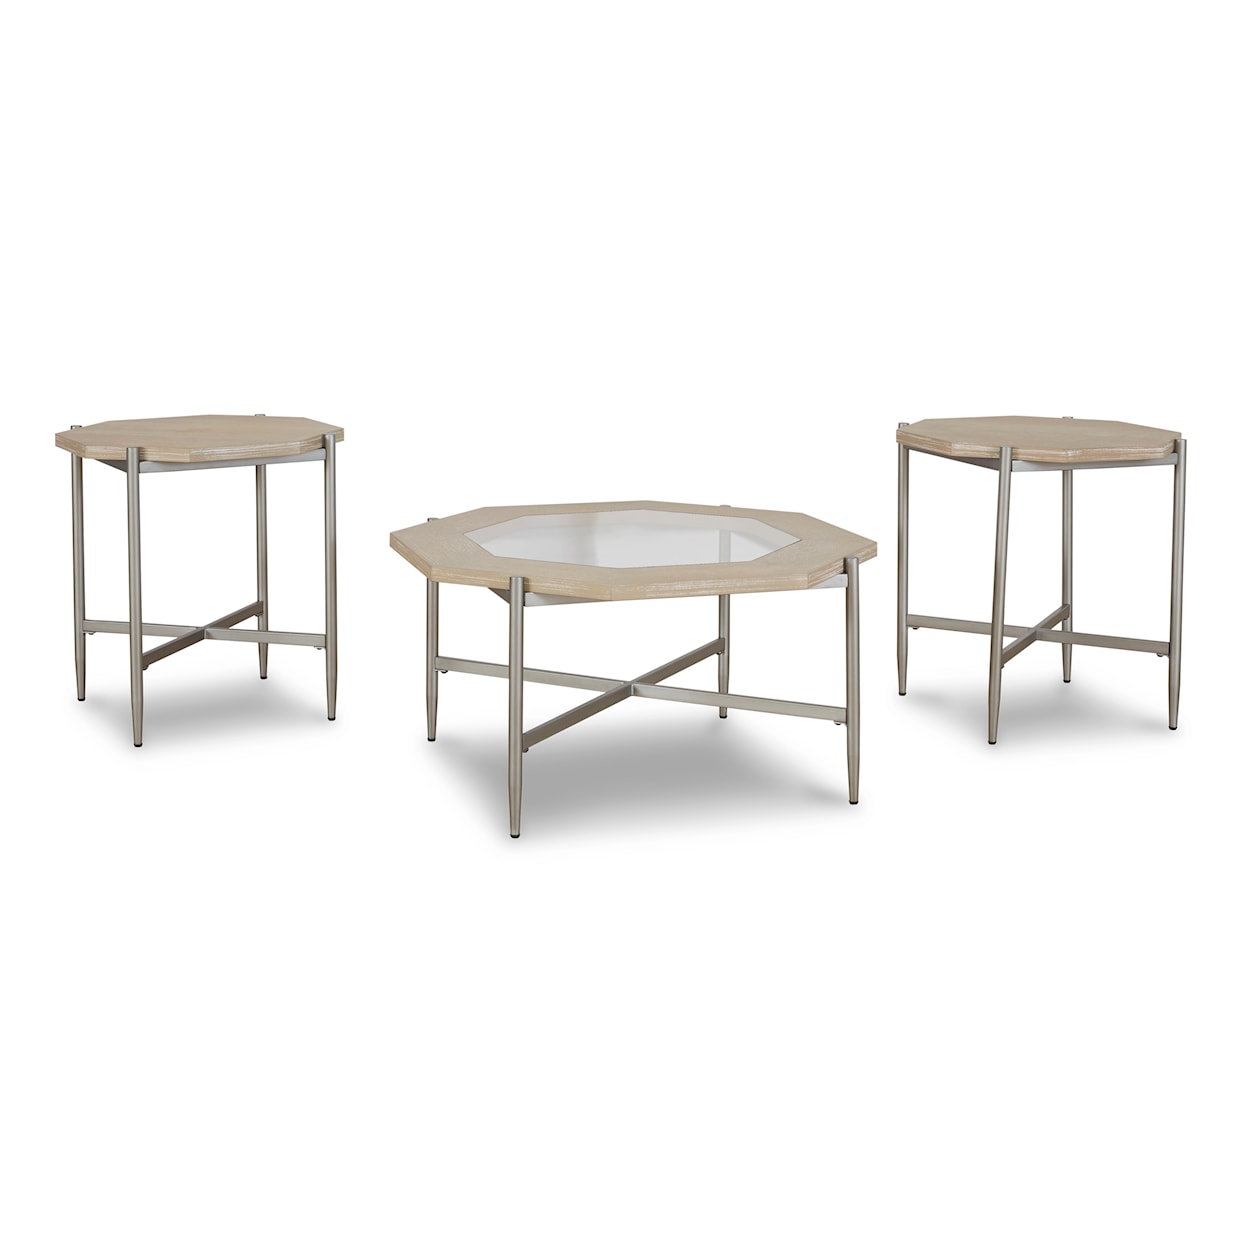 Benchcraft Varlowe 3-Piece Occasional Table Set